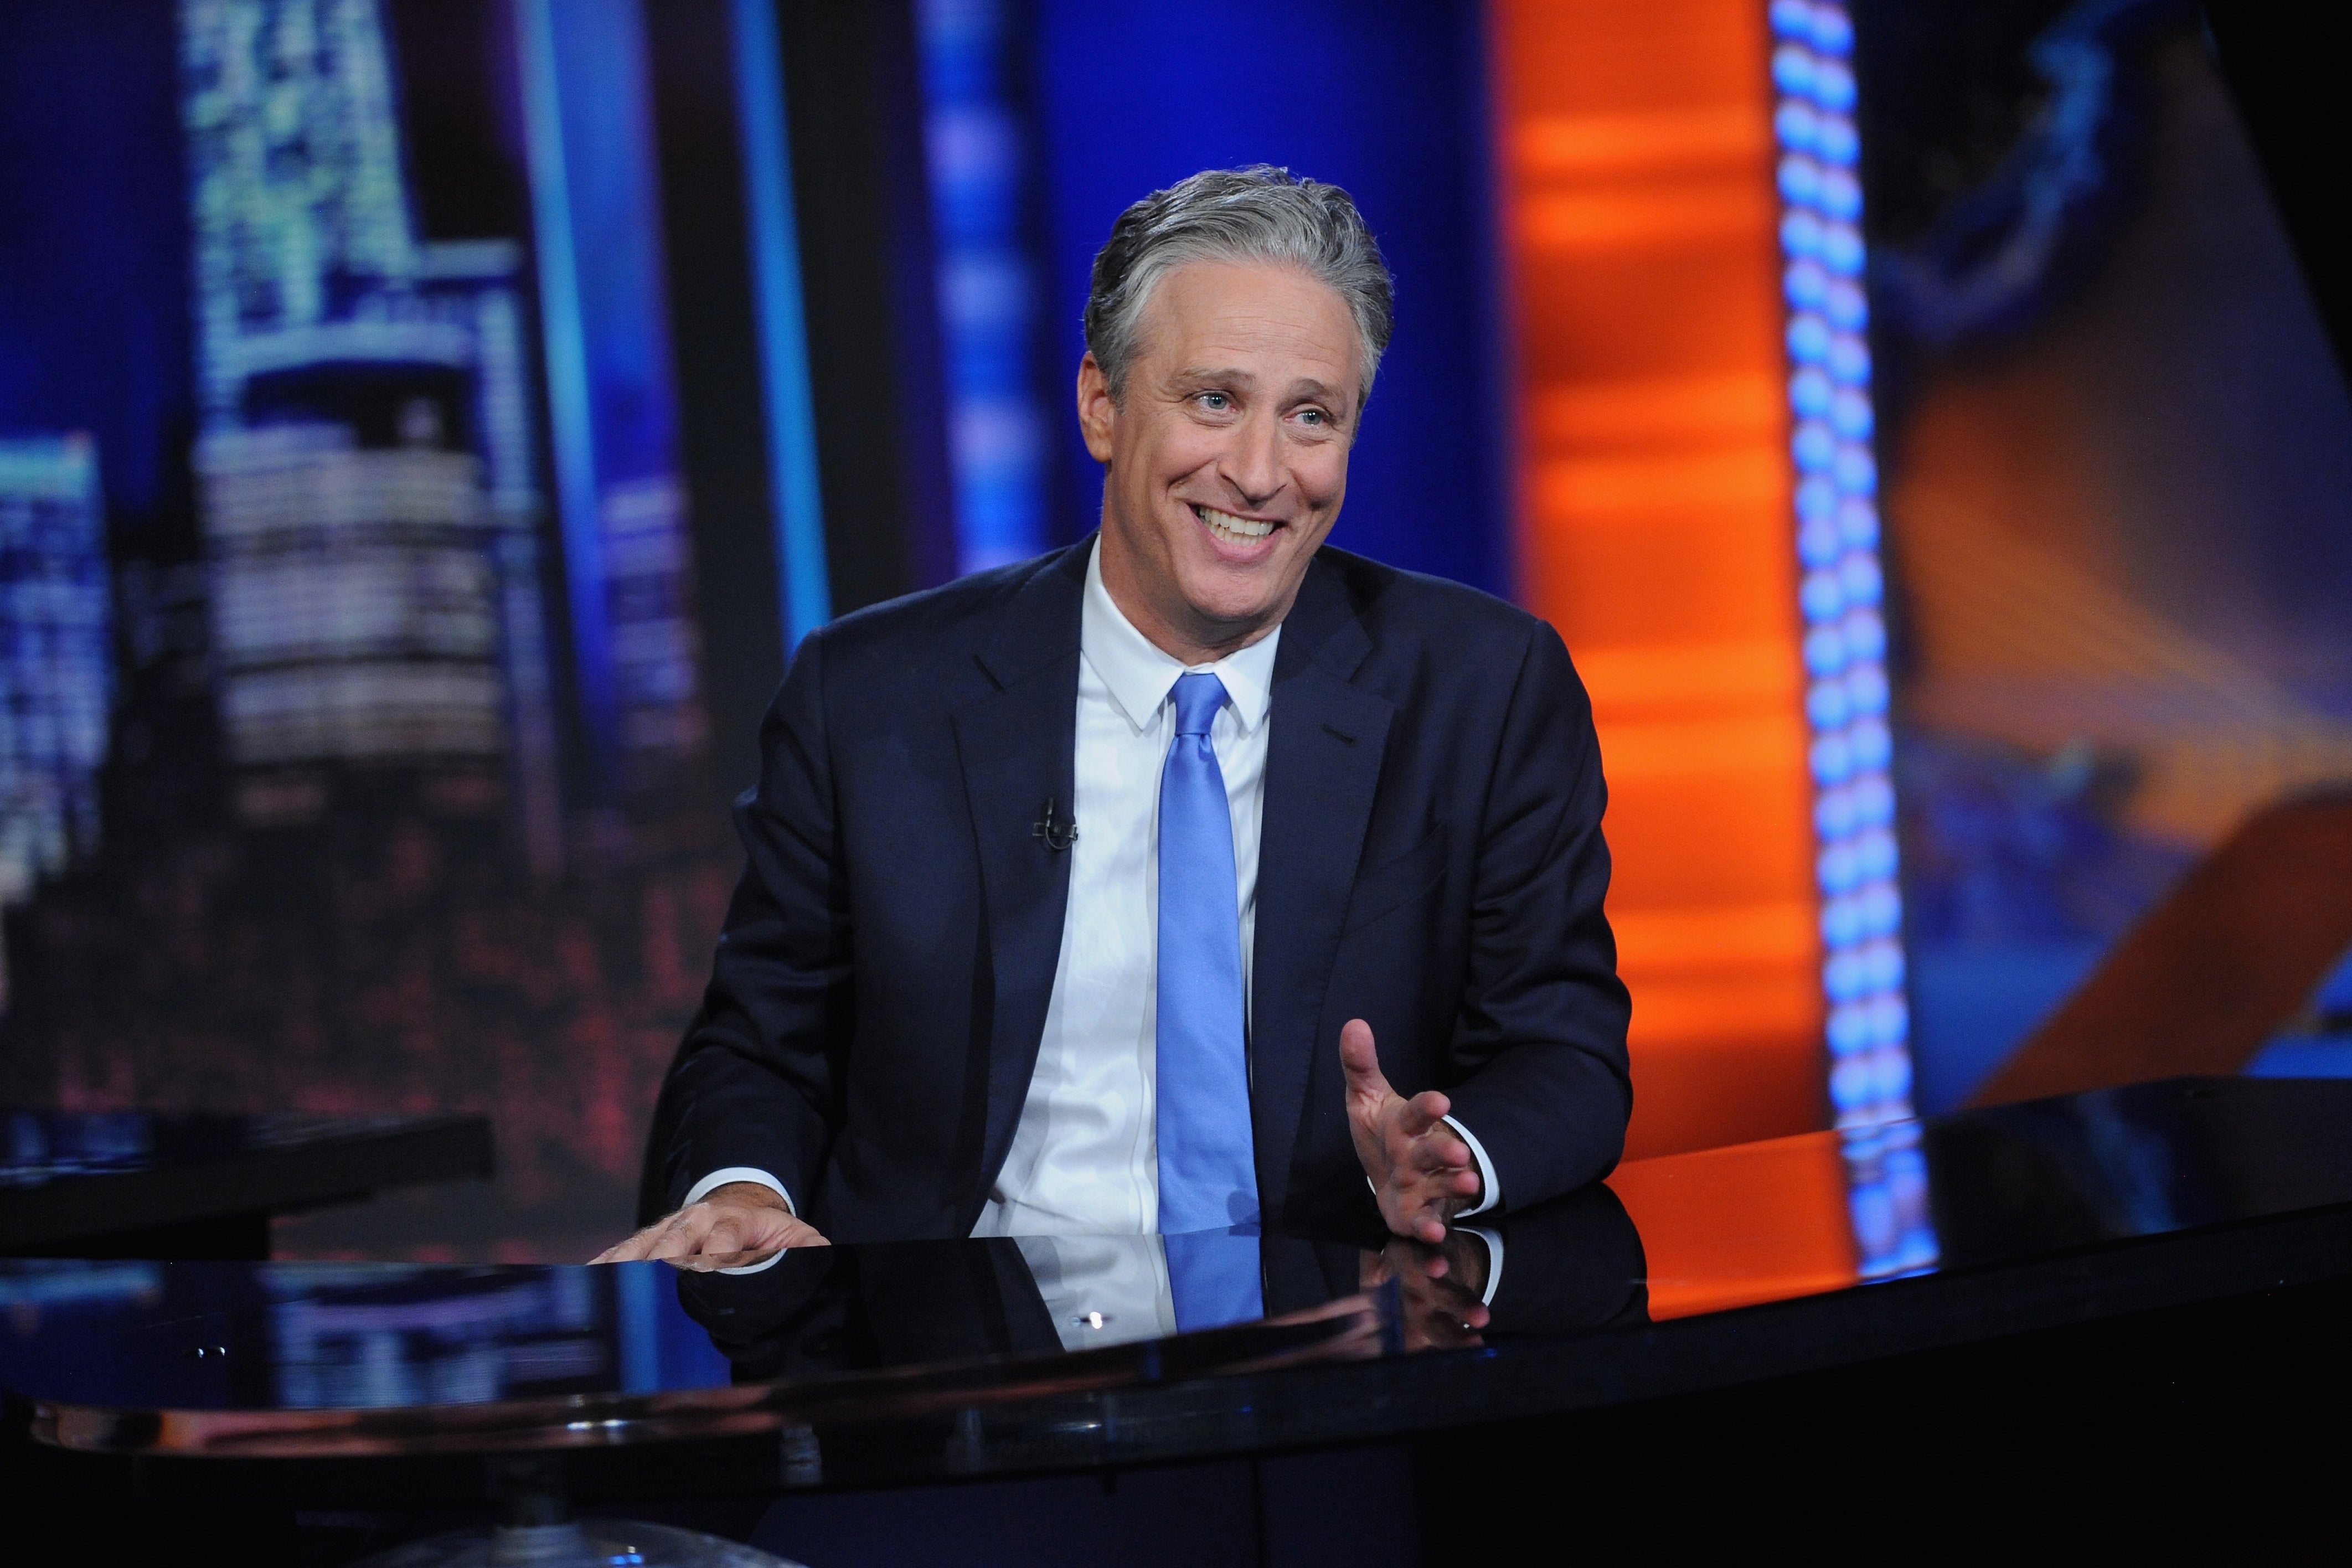 Jon Stewart The Daily Show Host Is Back But Is He Really What We Need